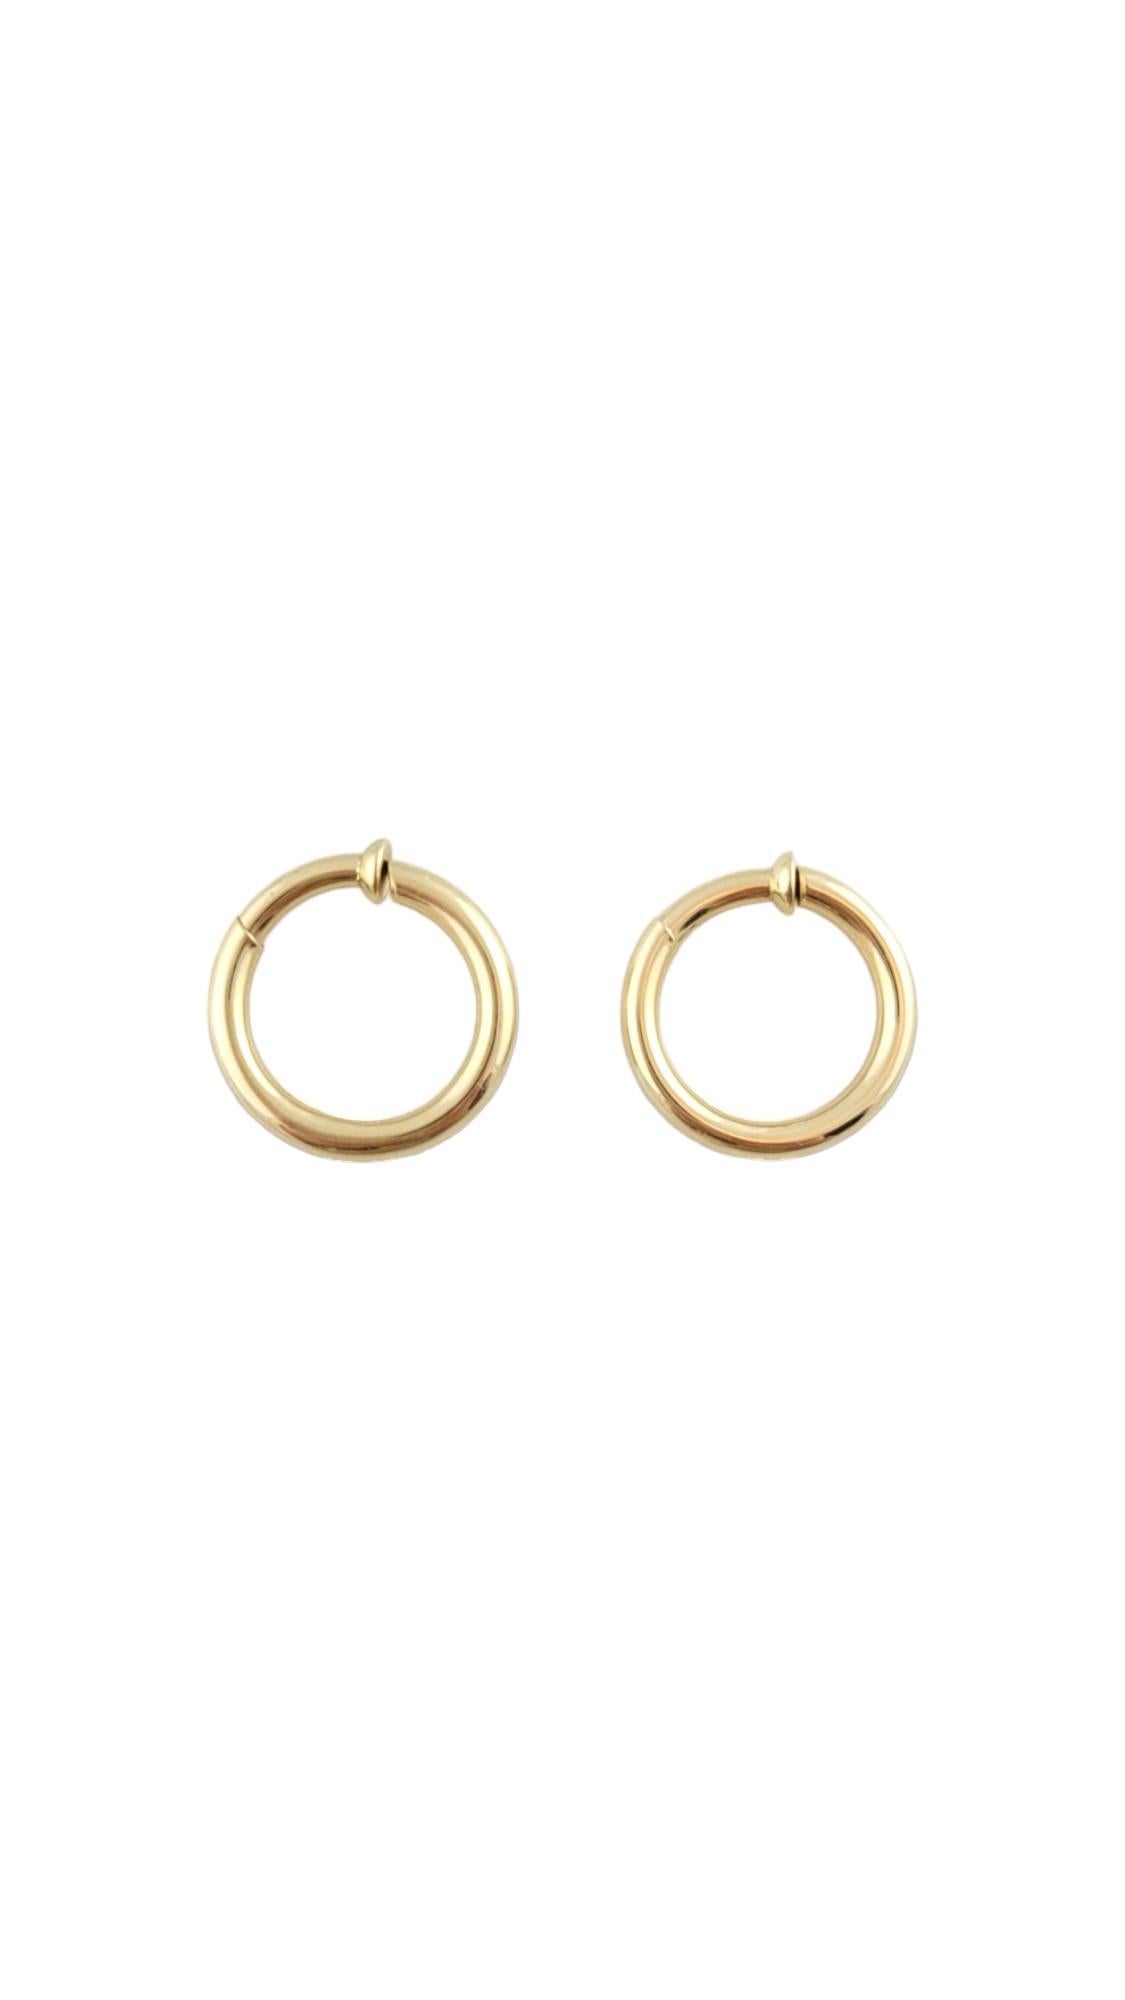 Vintage 14K Yellow Gold Hoop Earrings

Hinged hoop earrings in 14K yellow gold.

Hallmark: APR 14K Turkey

Weight: 3.14 g/ 2.02 dwt.

Diameter: 21.42 mm/ 0.843 in.

3 mm thick

Very good condition, professionally polished.

Will come packaged in a